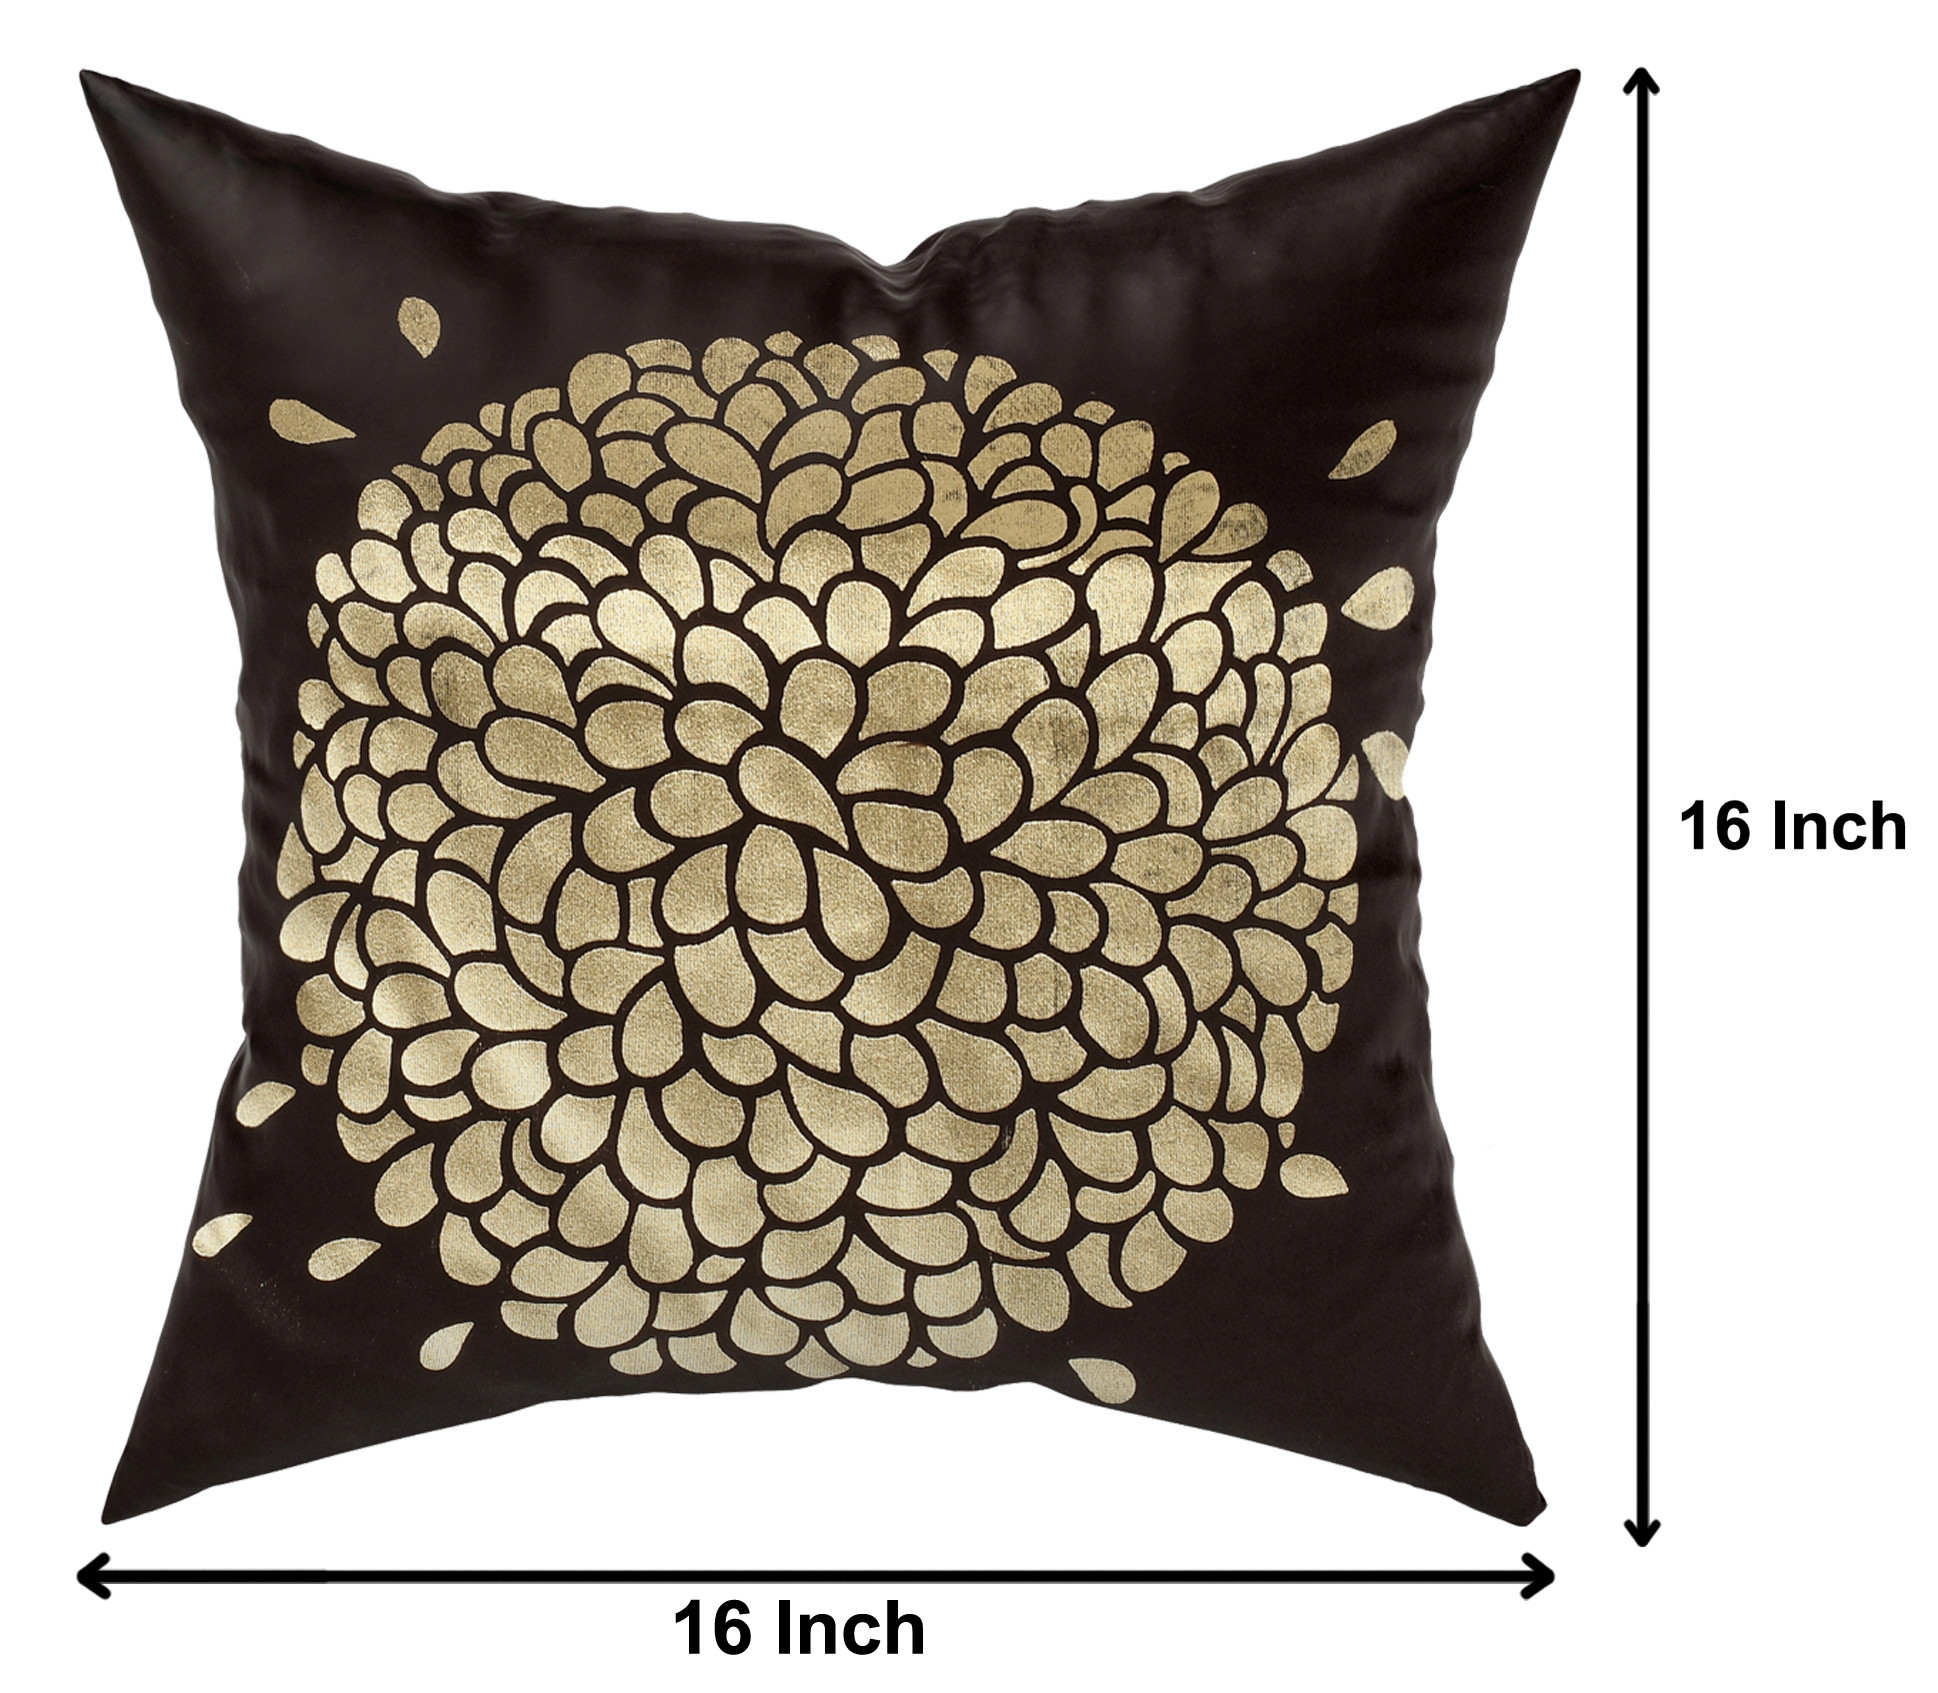 Kuber Industries Velvet Floral Design Soft Decorative Square Throw Pillow Cover, Cushion Covers, Pillow Case For Sofa Couch Bed Chair 16x16 Inch-(Brown)